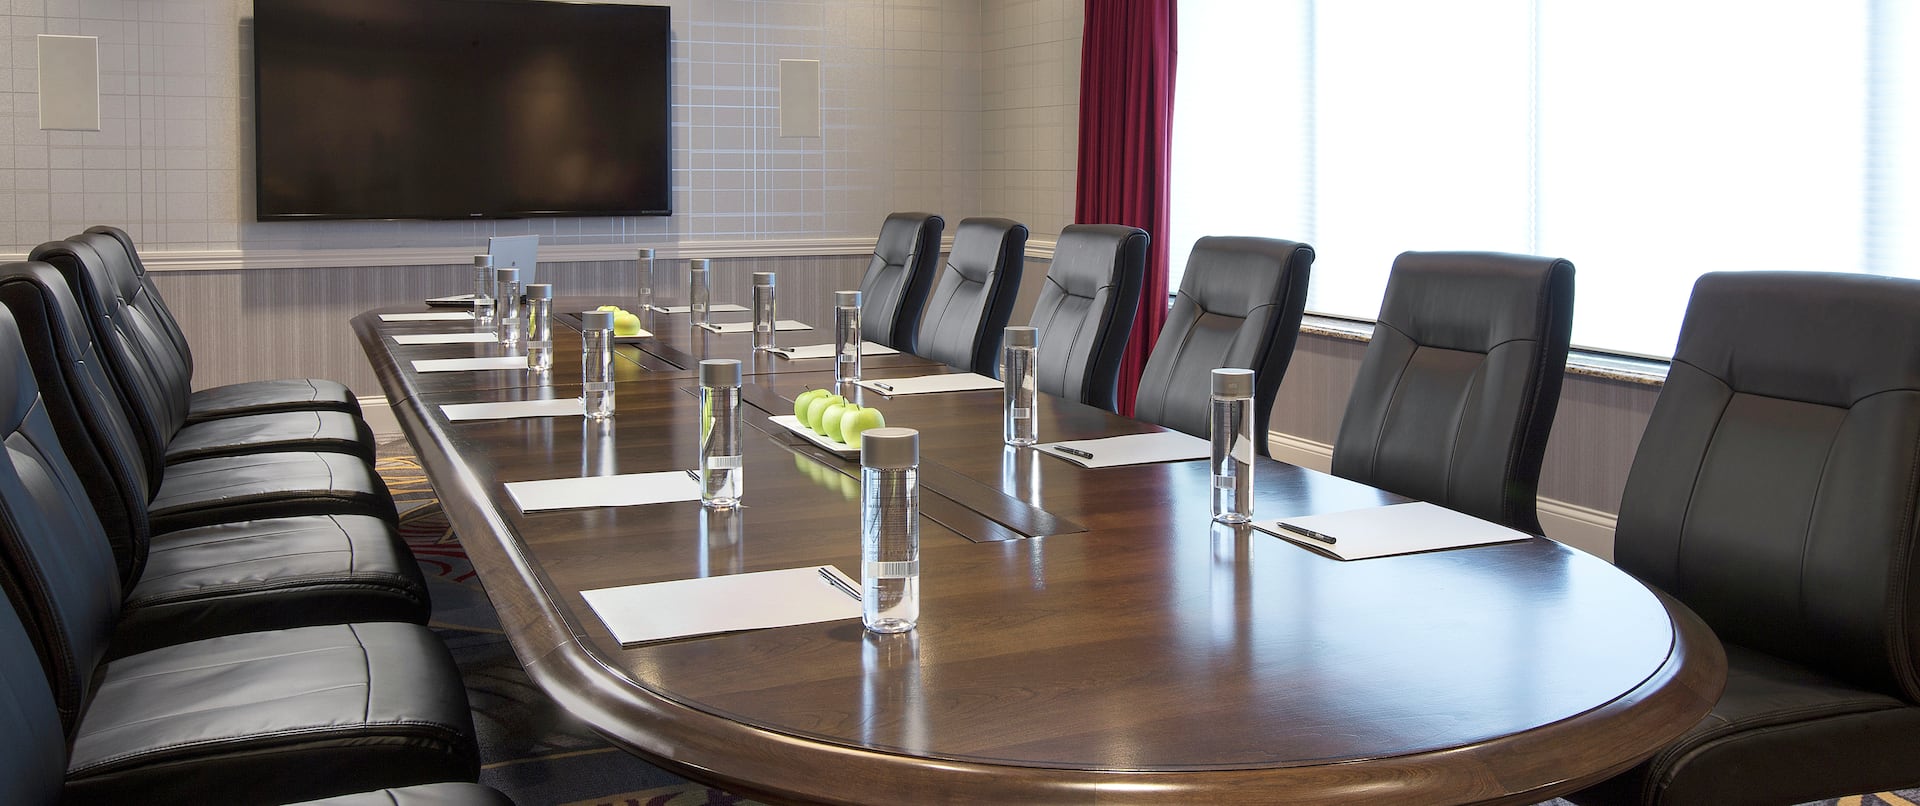 DoubleTree Hotel Boardroom with Table, Office Chairs, and Room Technology